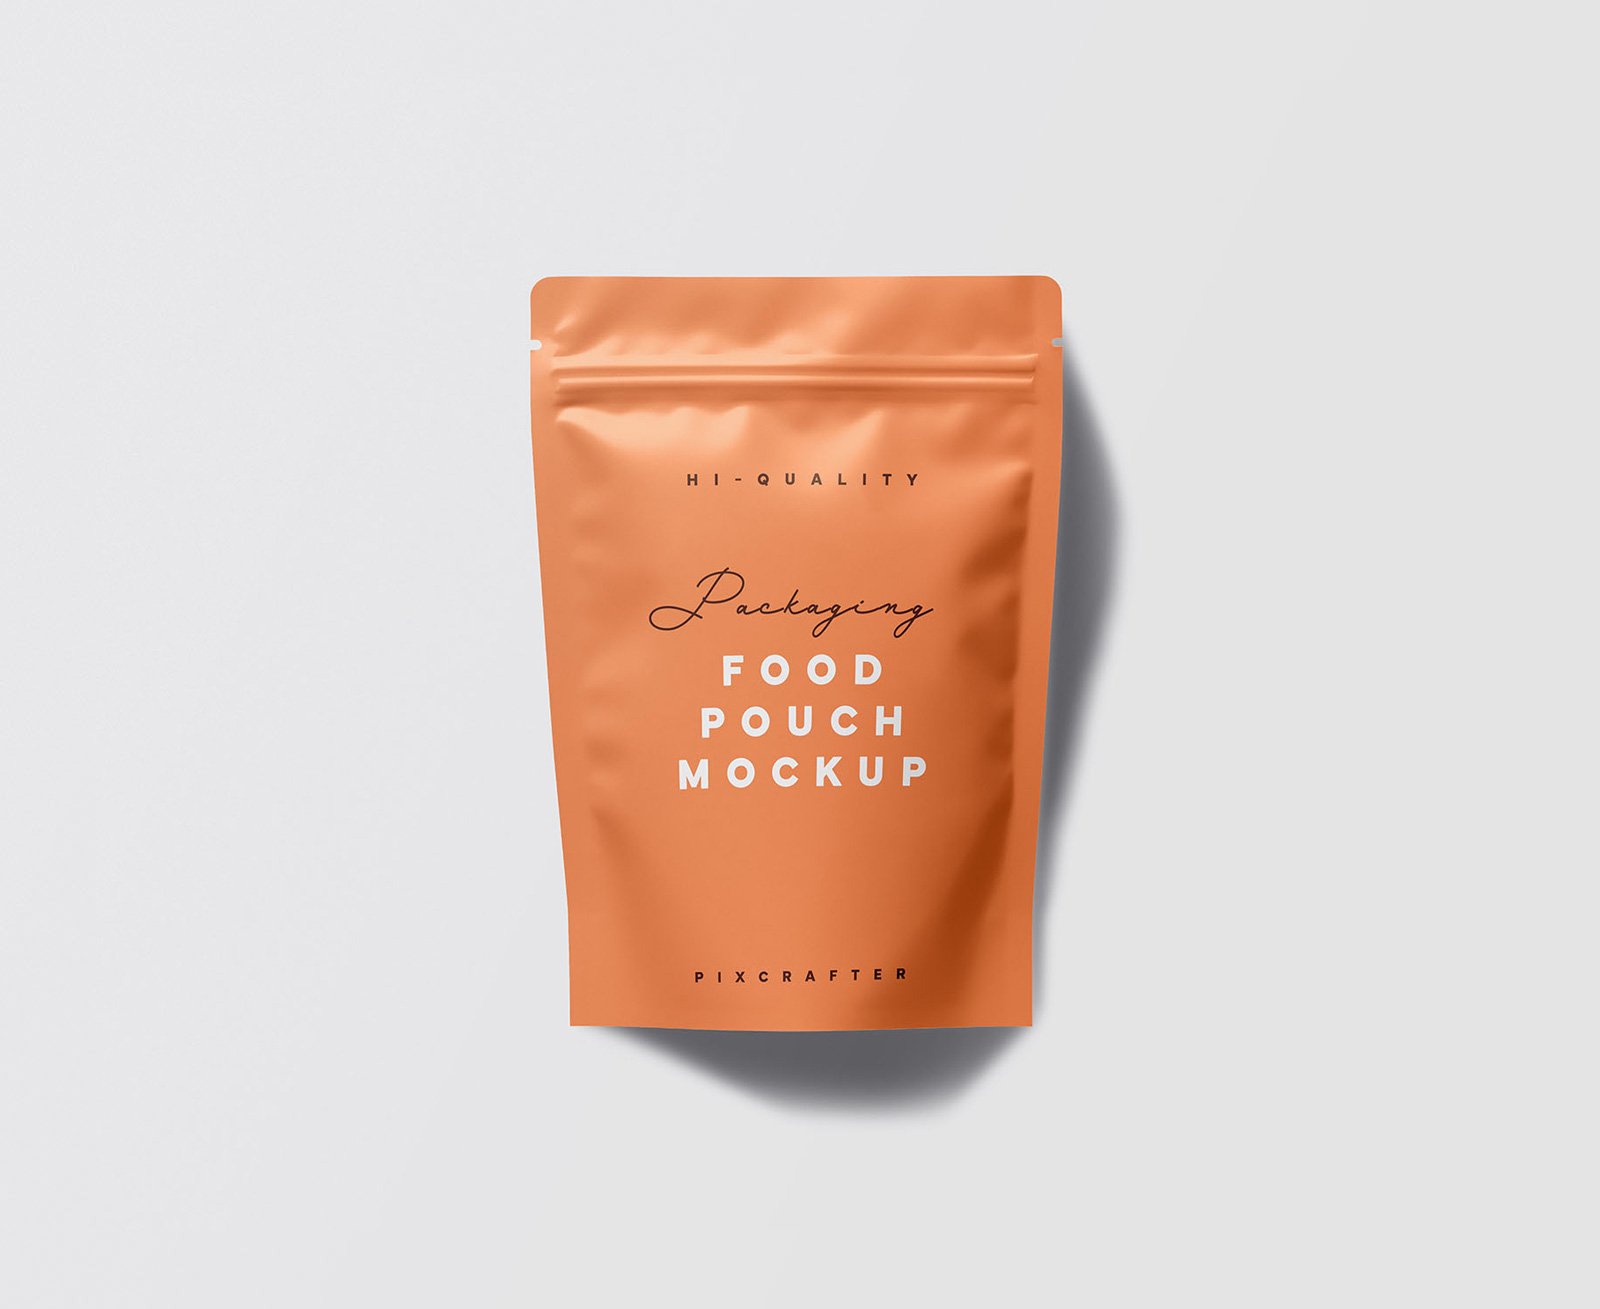 Food pouch mockup template